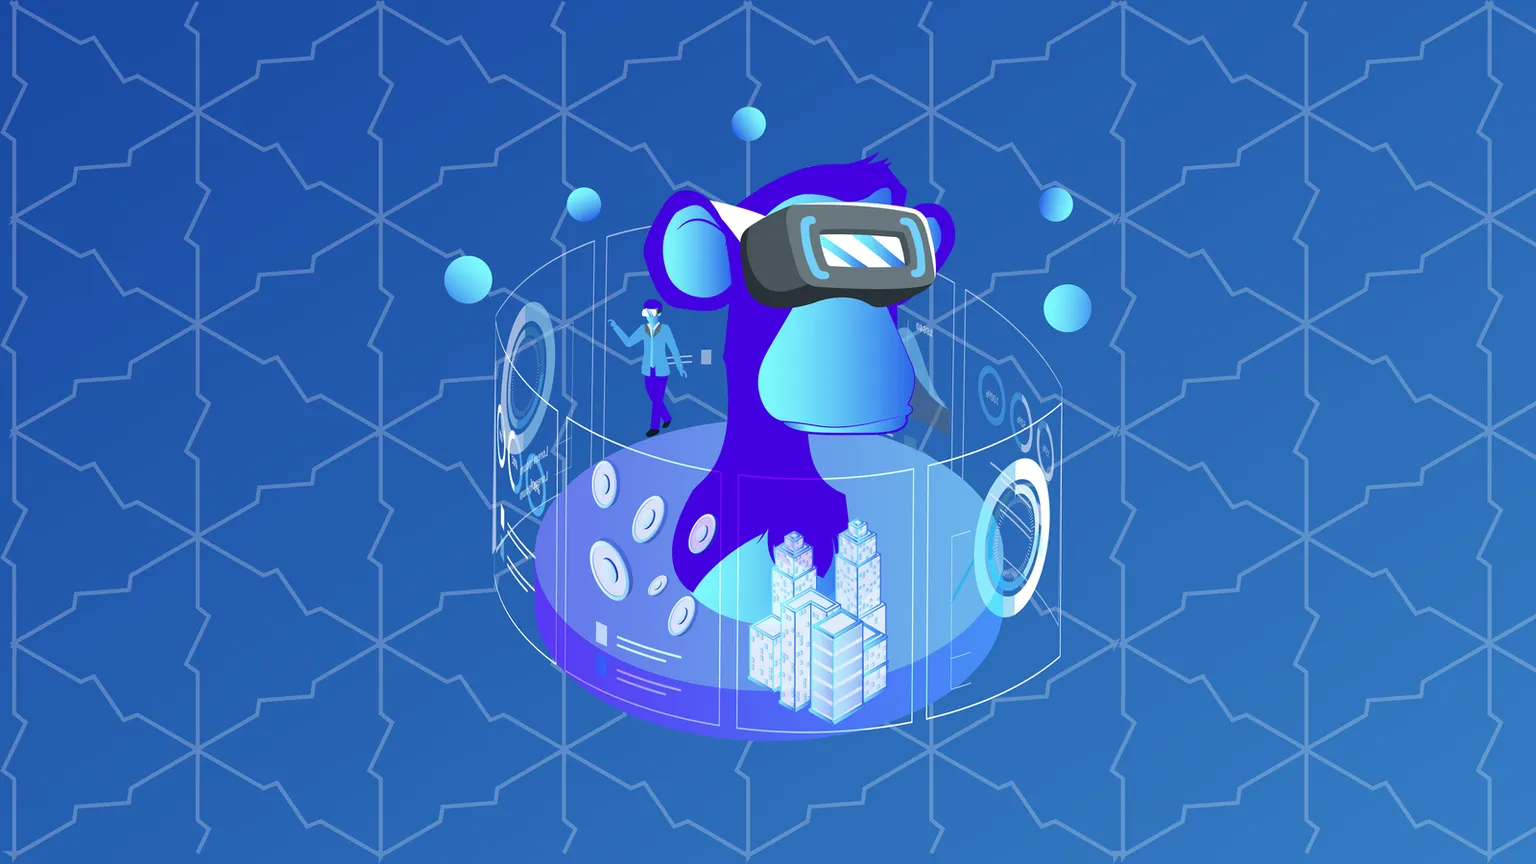 Metaverse image with an ape with augmented reality goggles.